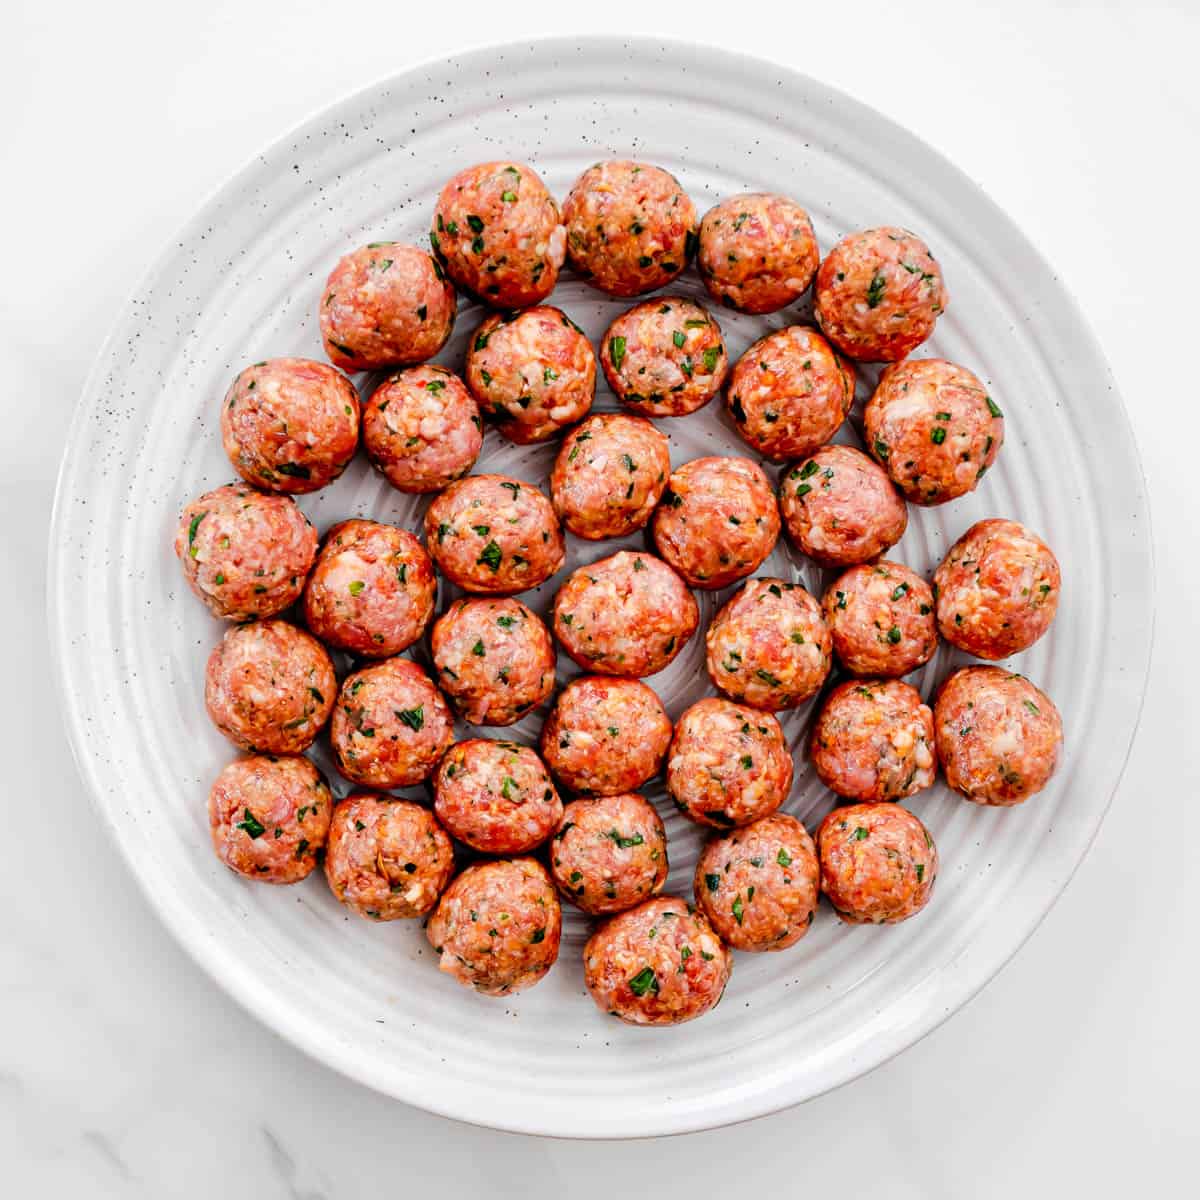 Shape and cook the meatballs.